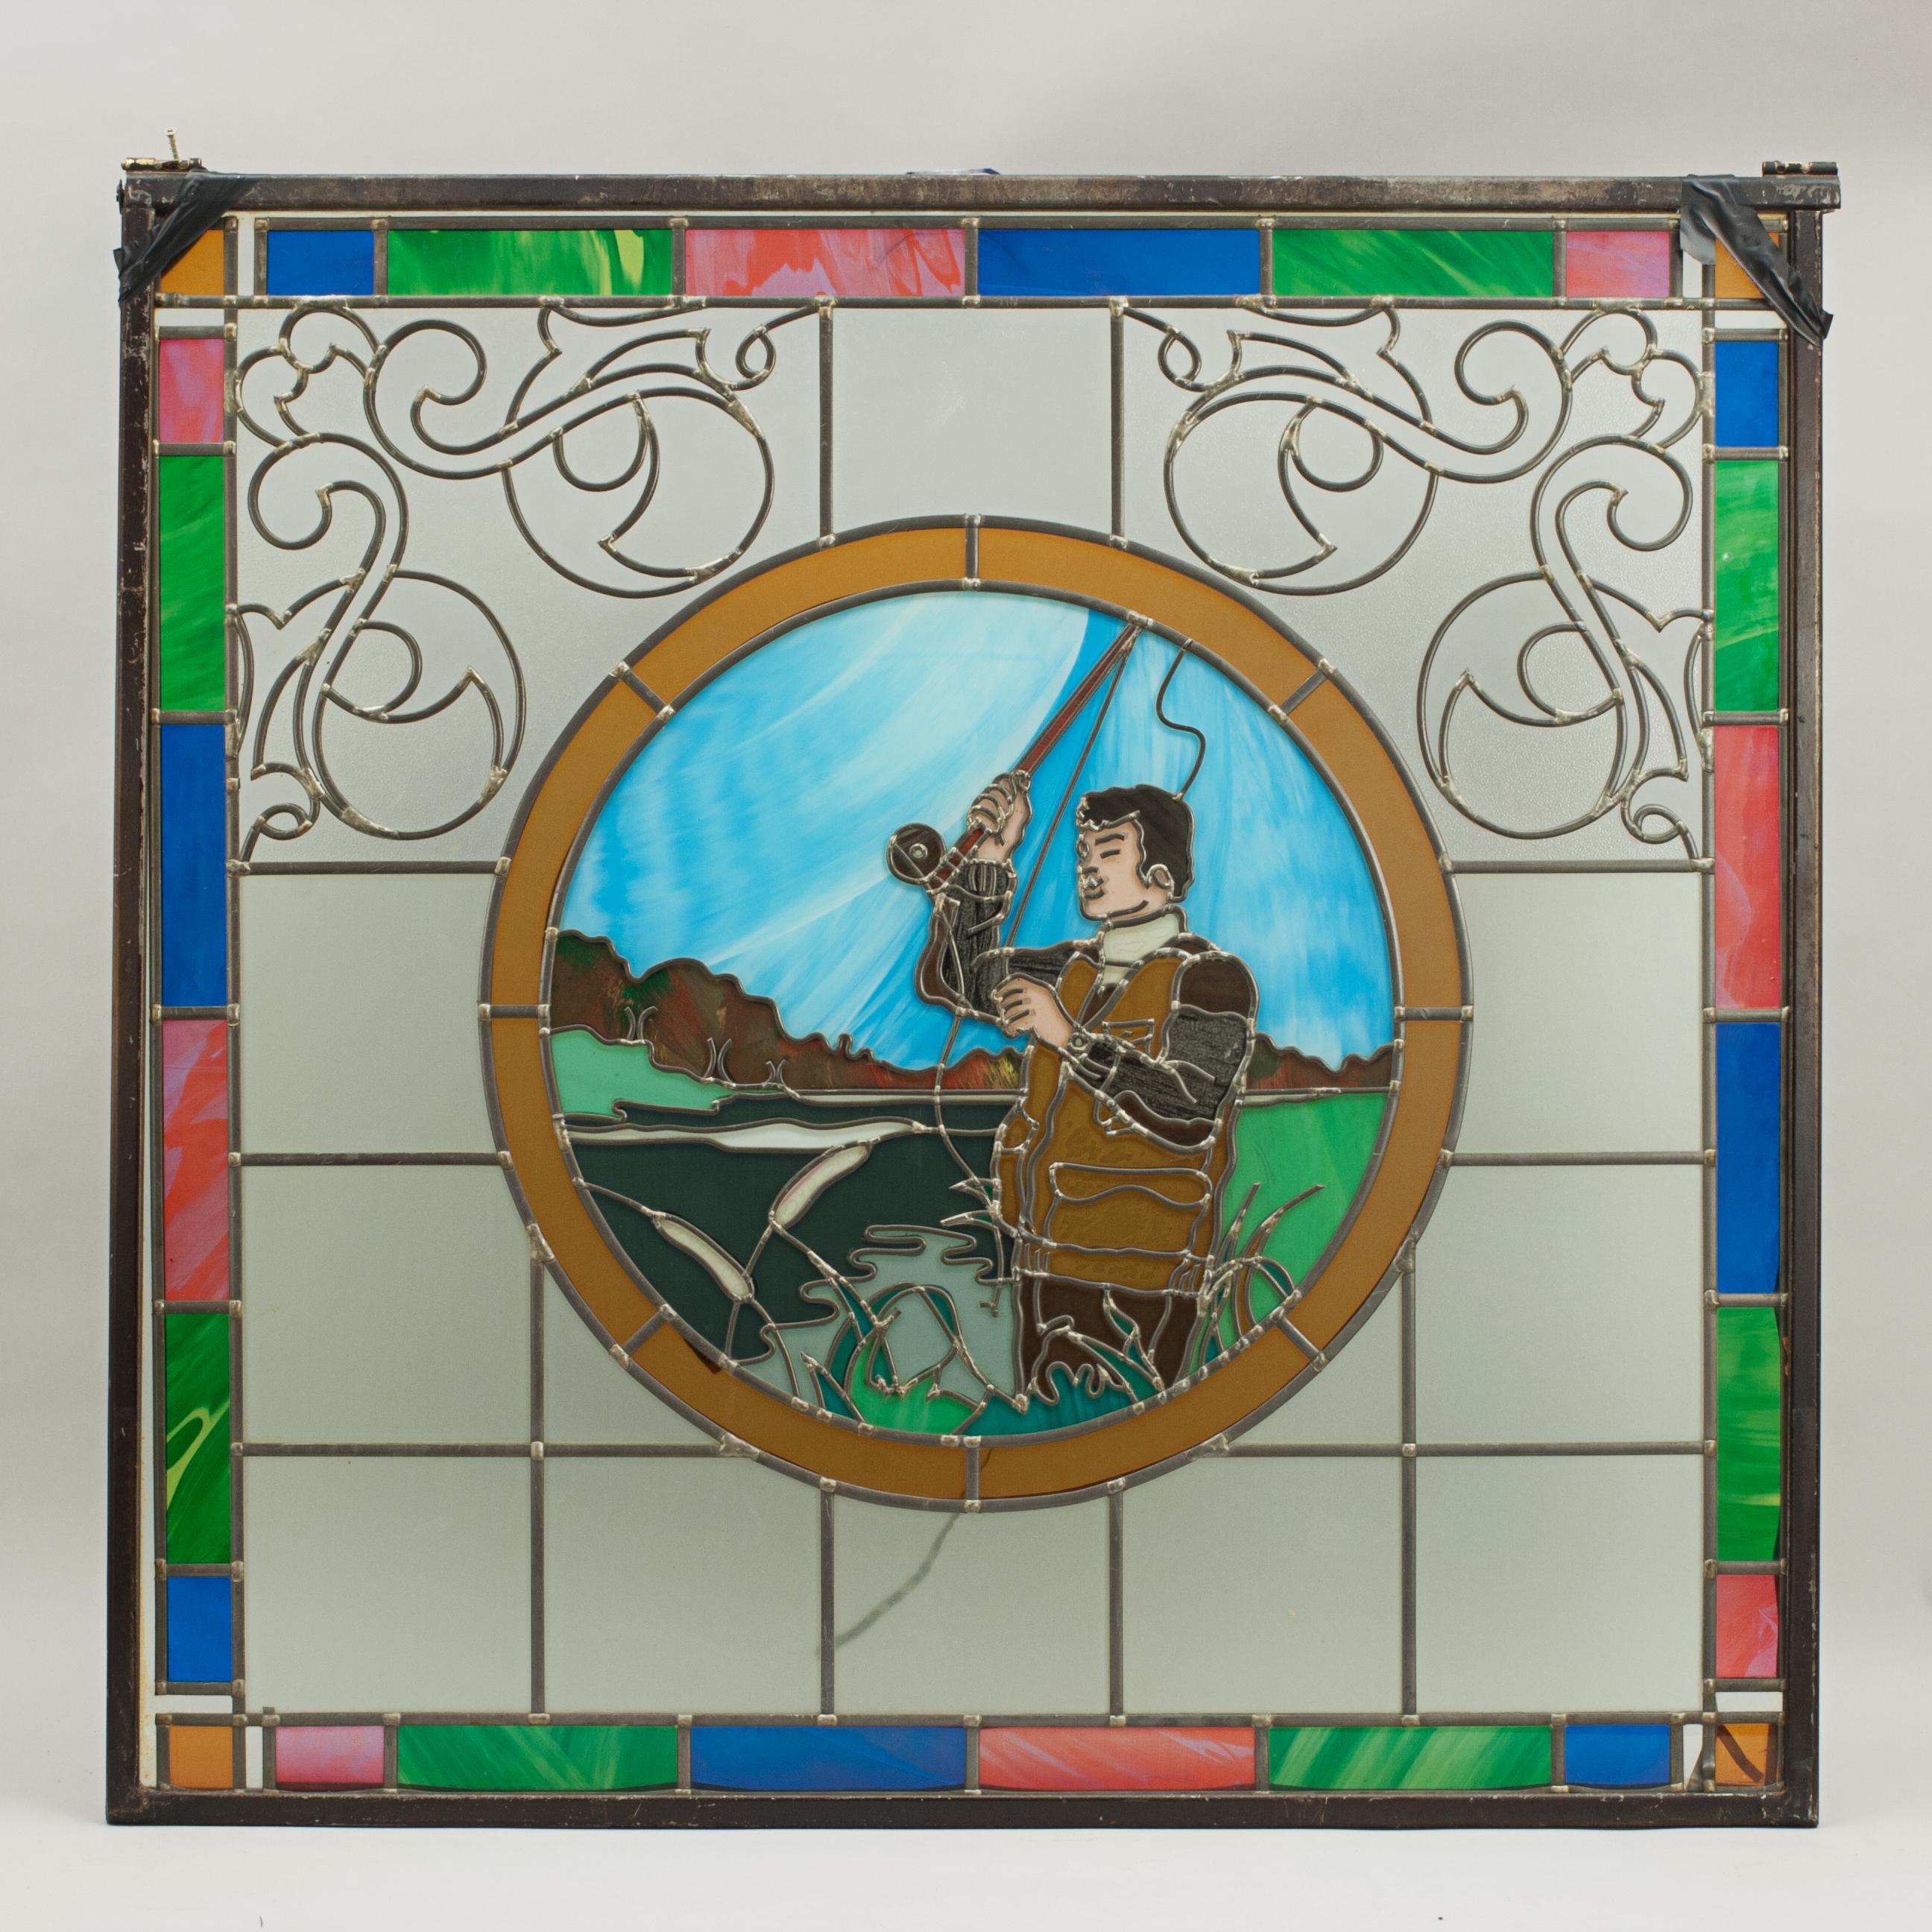 A magnificent sporting stained glass window depicting a fishing scene. The window shows an angler about to cast off, the edging of the window made of colored glass. The colored leaded window was made for the centenary of the 'Mansfield Bar' in